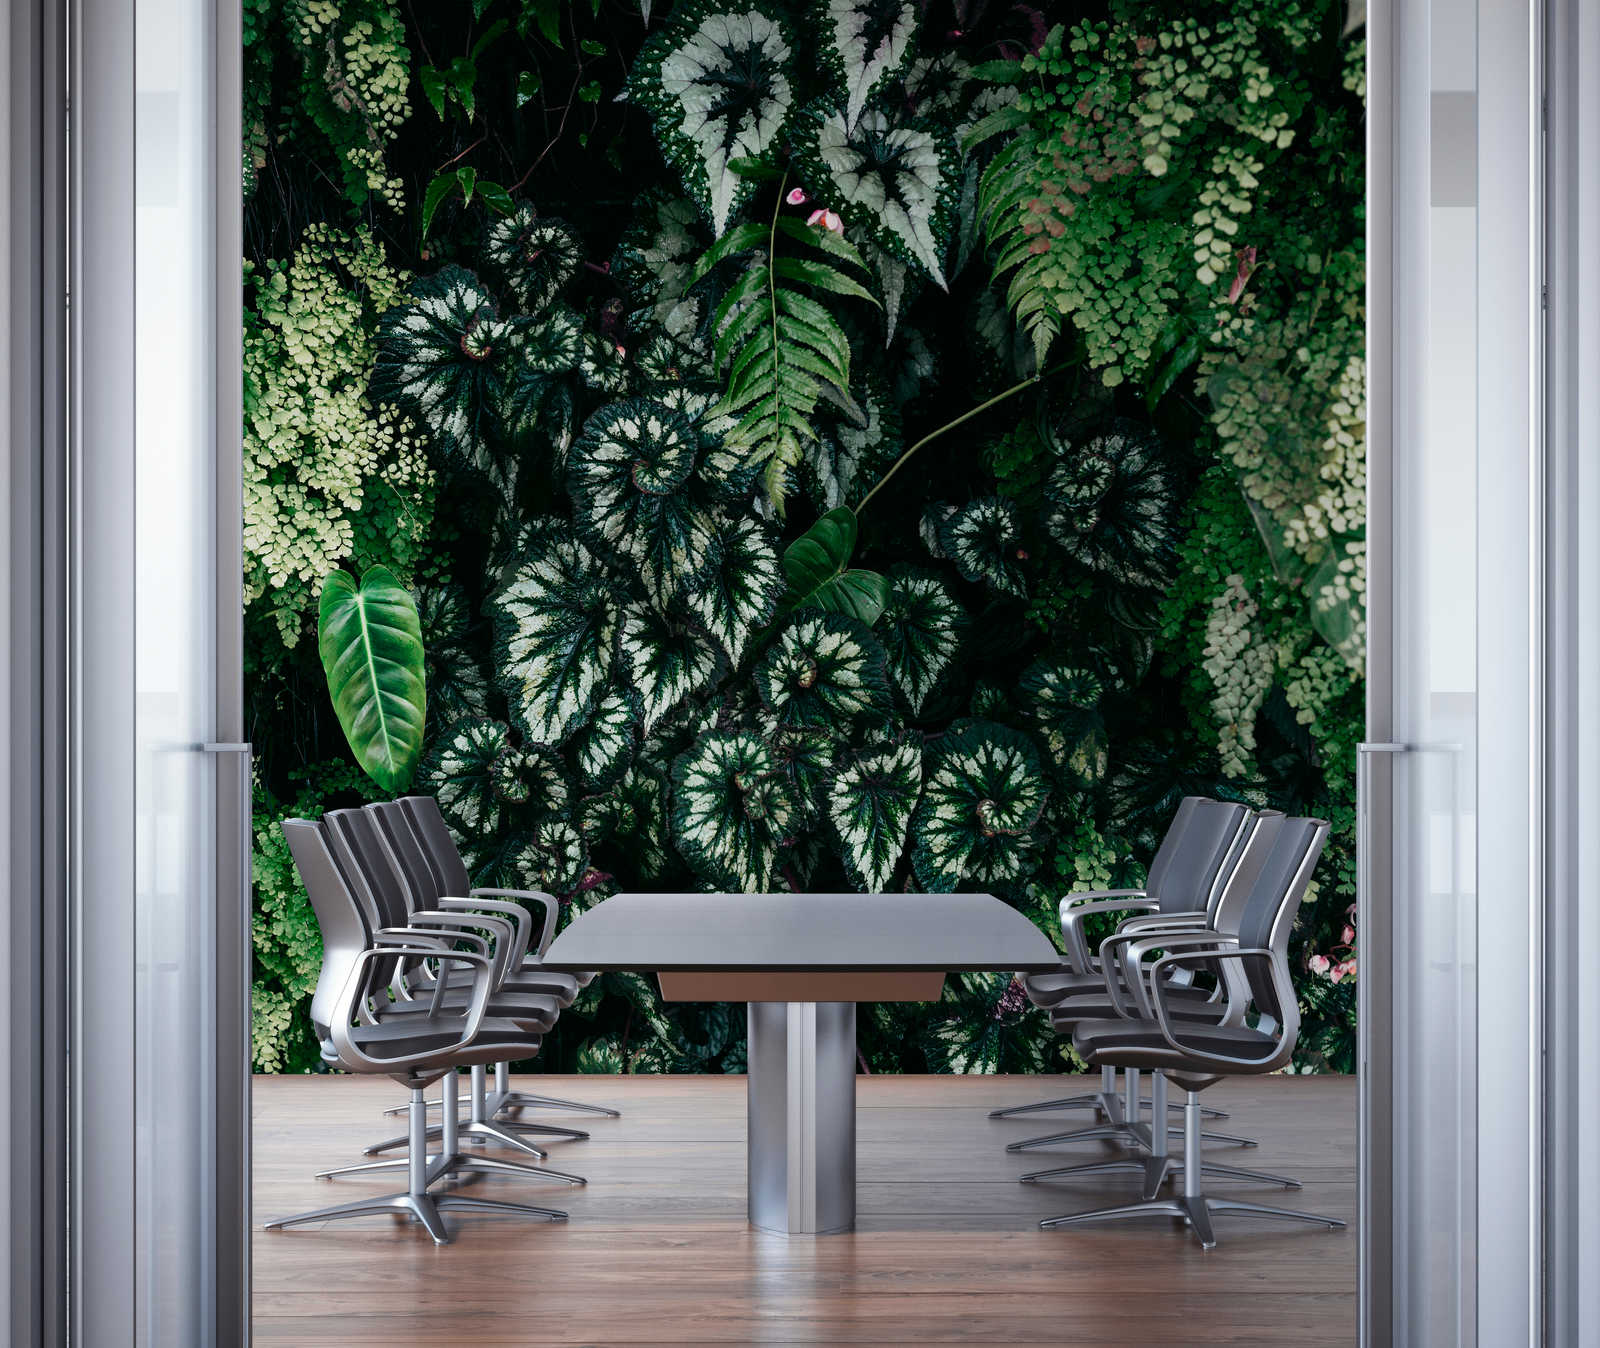             Deep Green 2 - wall mural leafy thicket, ferns & hanging plants
        